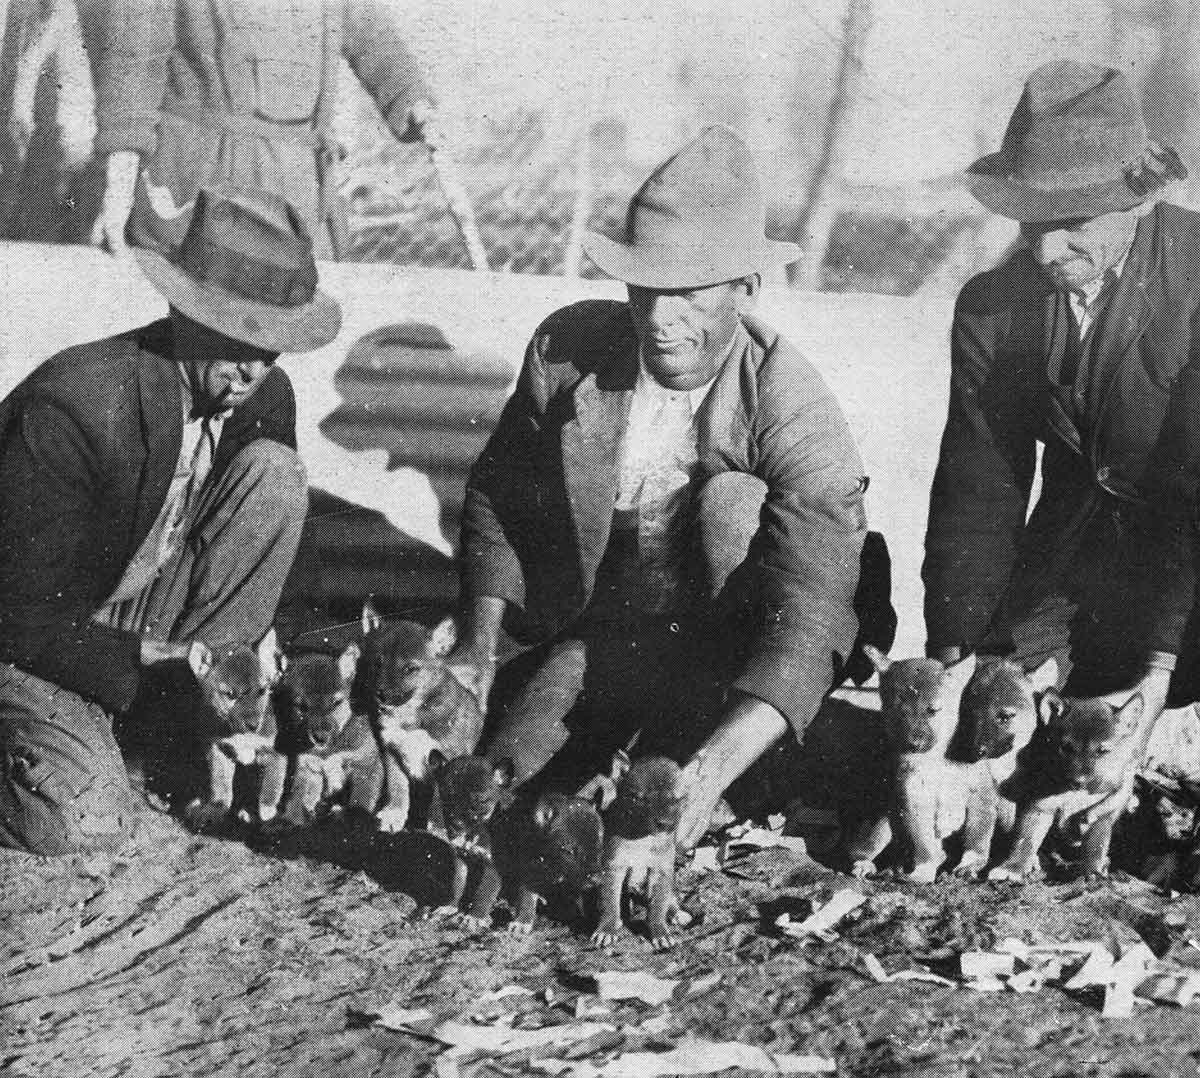 Black and white photograph of three men with coats and hats on kneeling down with two litters of dingoes in front of them.